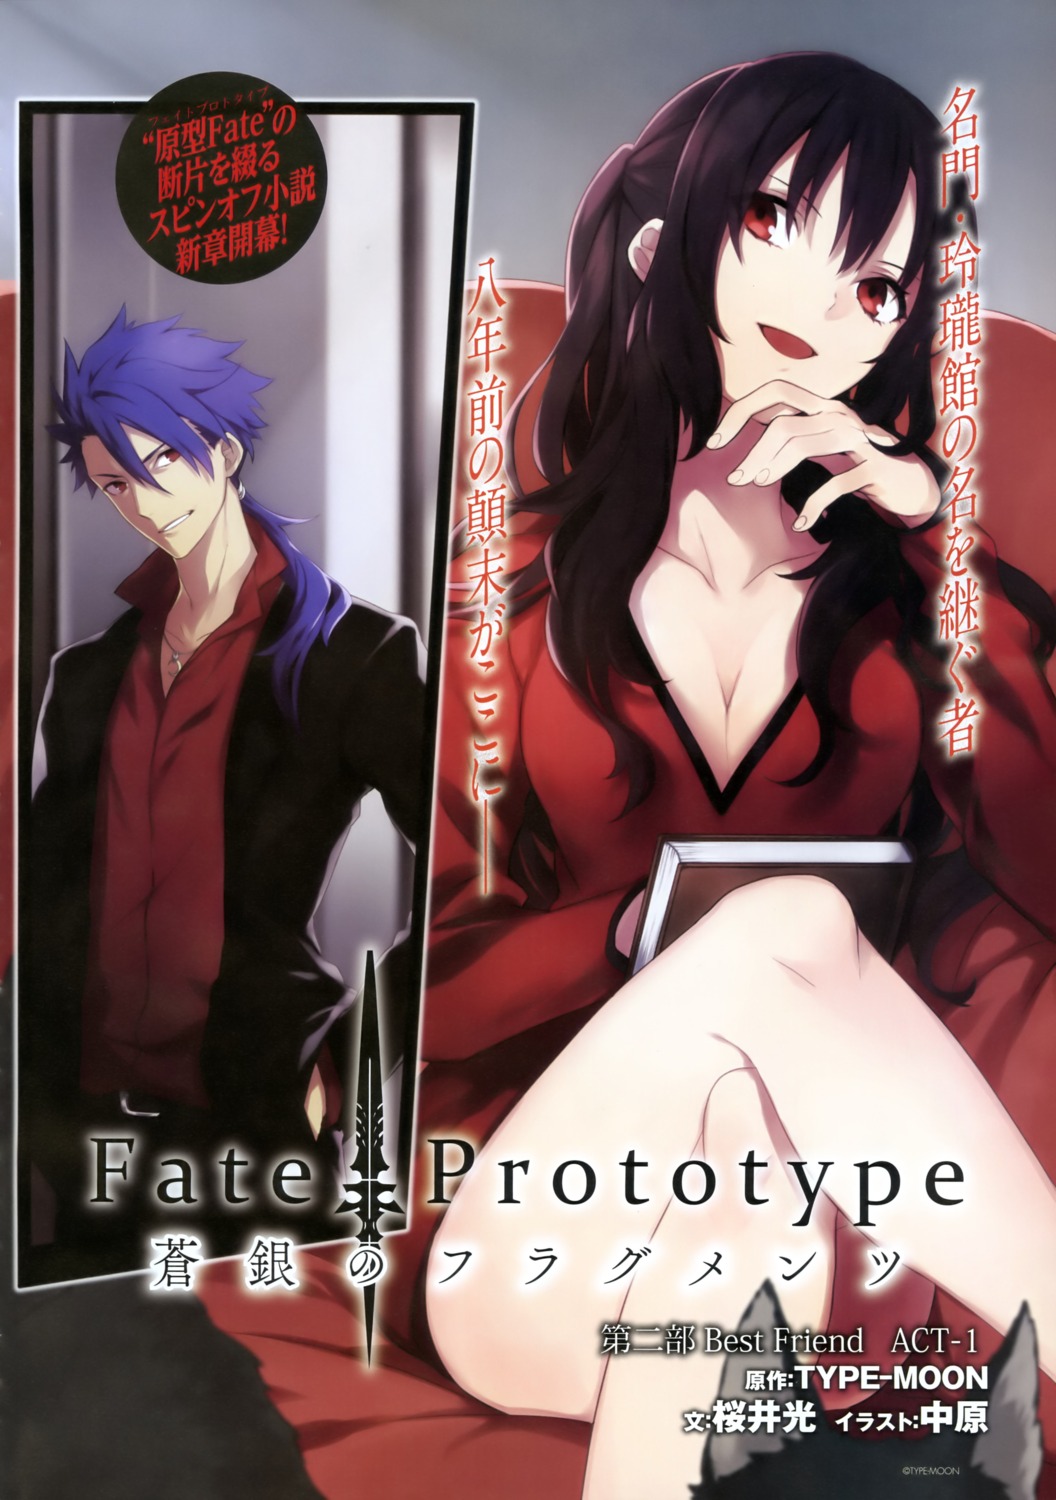 cleavage fate/prototype fate/prototype:_fragments_of_blue_and_silver fate/stay_night lancer_(fate/prototype) nakahara reiroukan_misaya type-moon